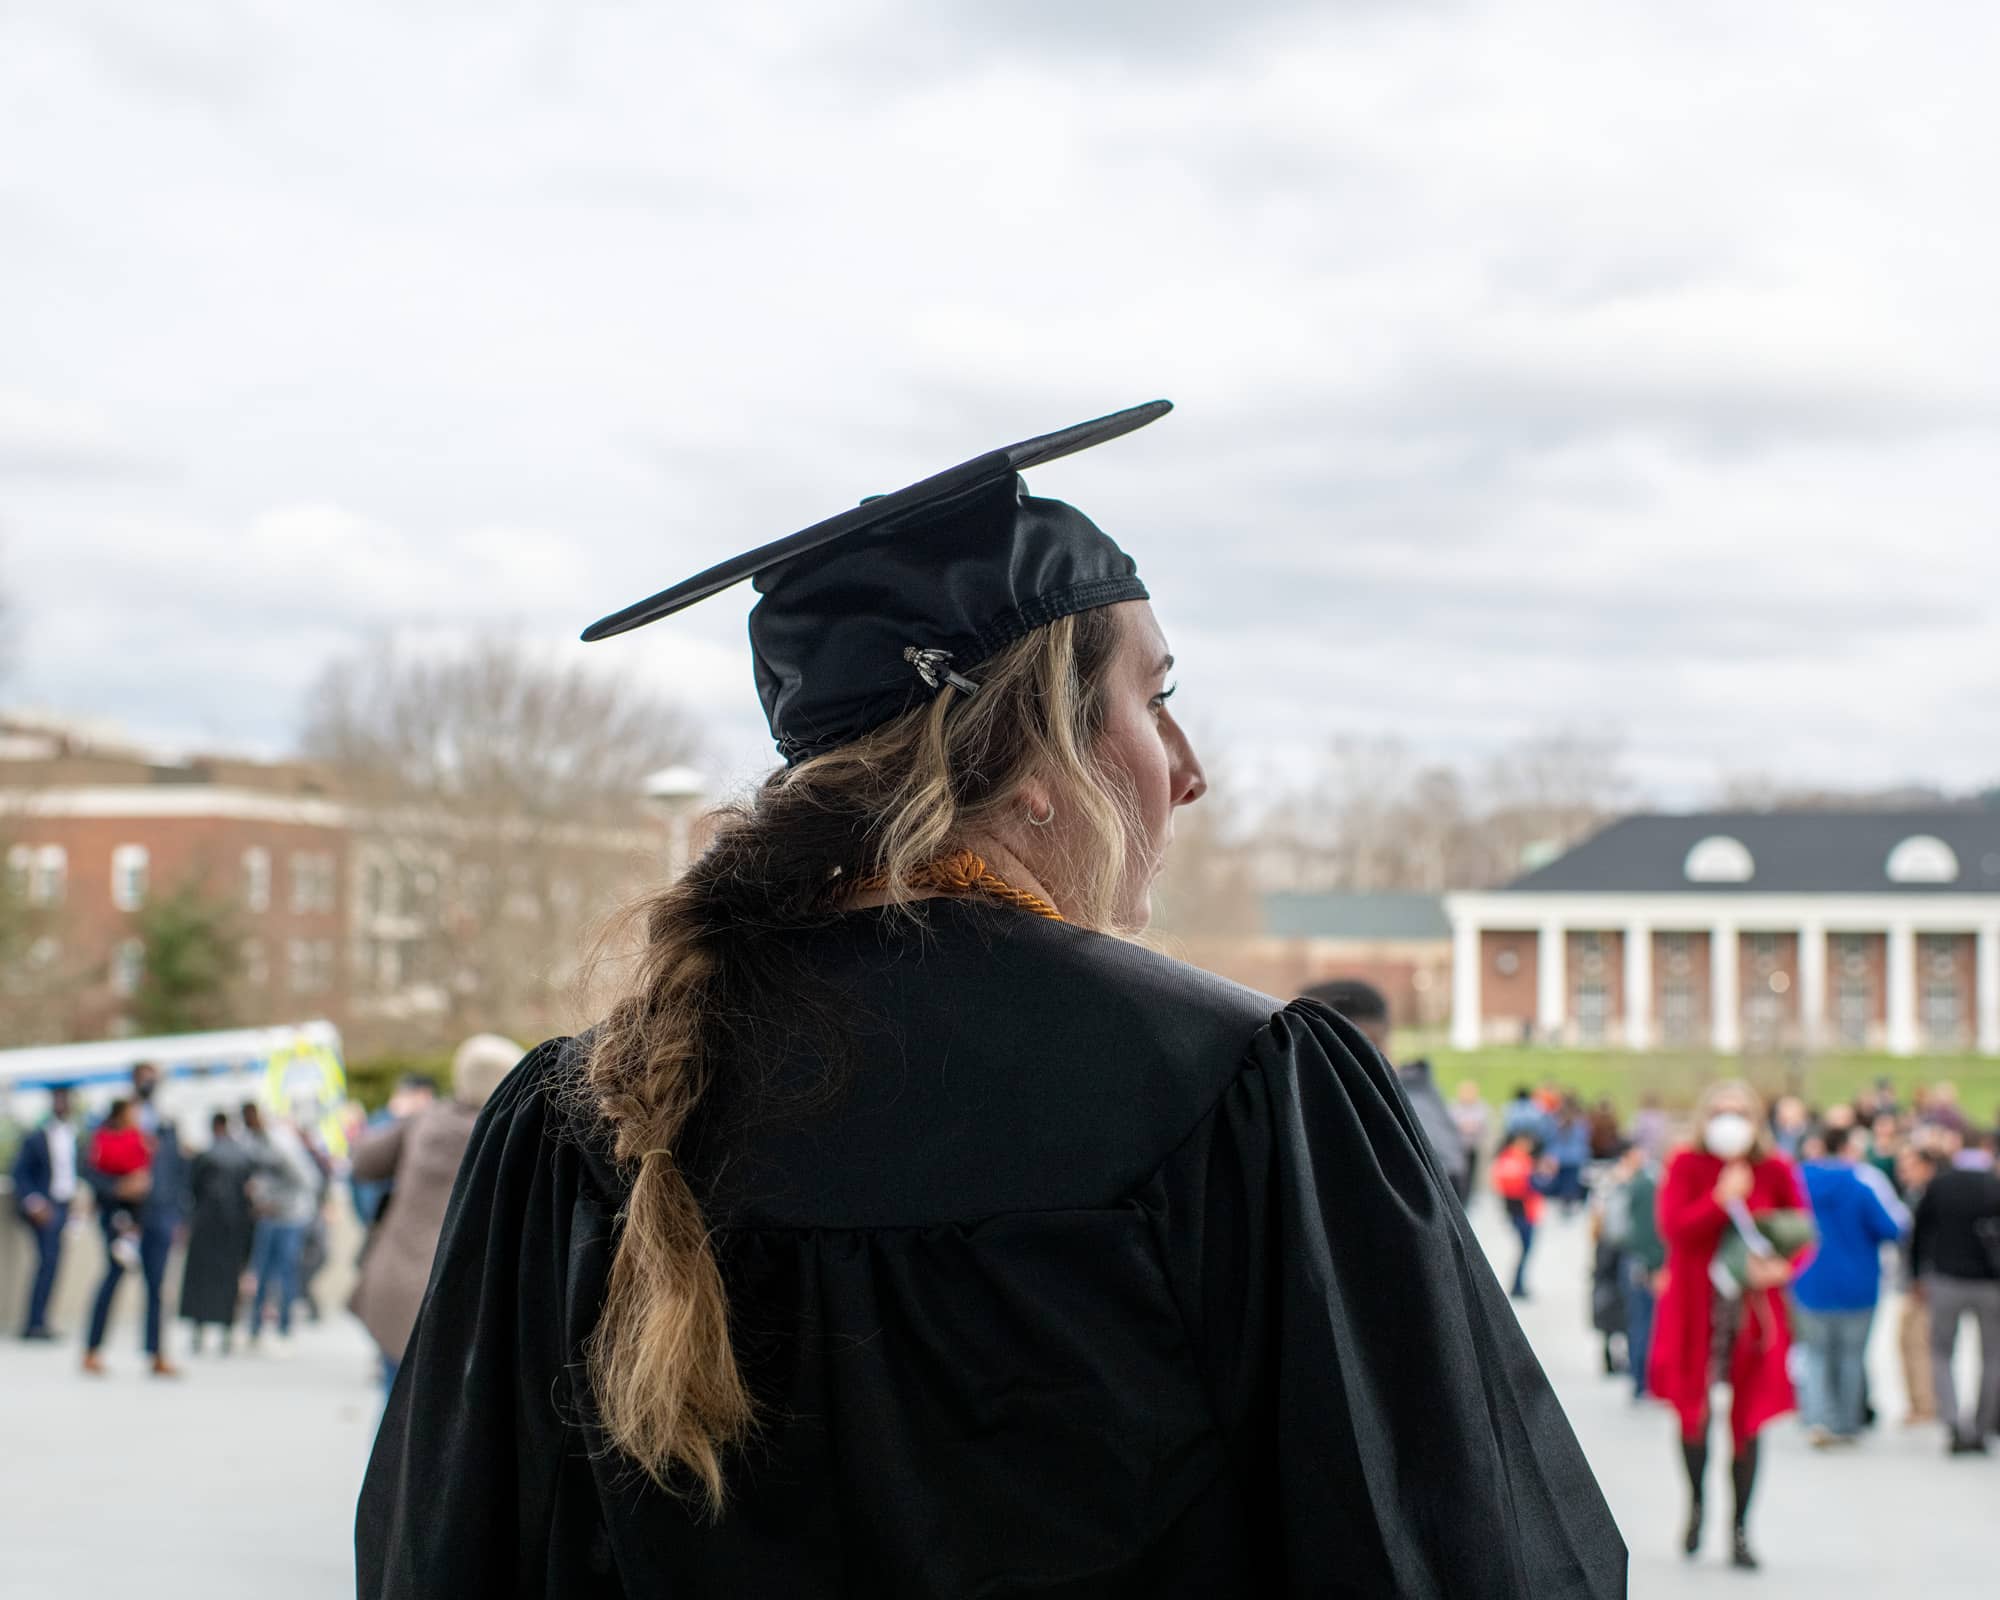 A recent graduate observes the crowd of families, friends and loved ones after the Fall Commencement 2021 at the Athens Campus.